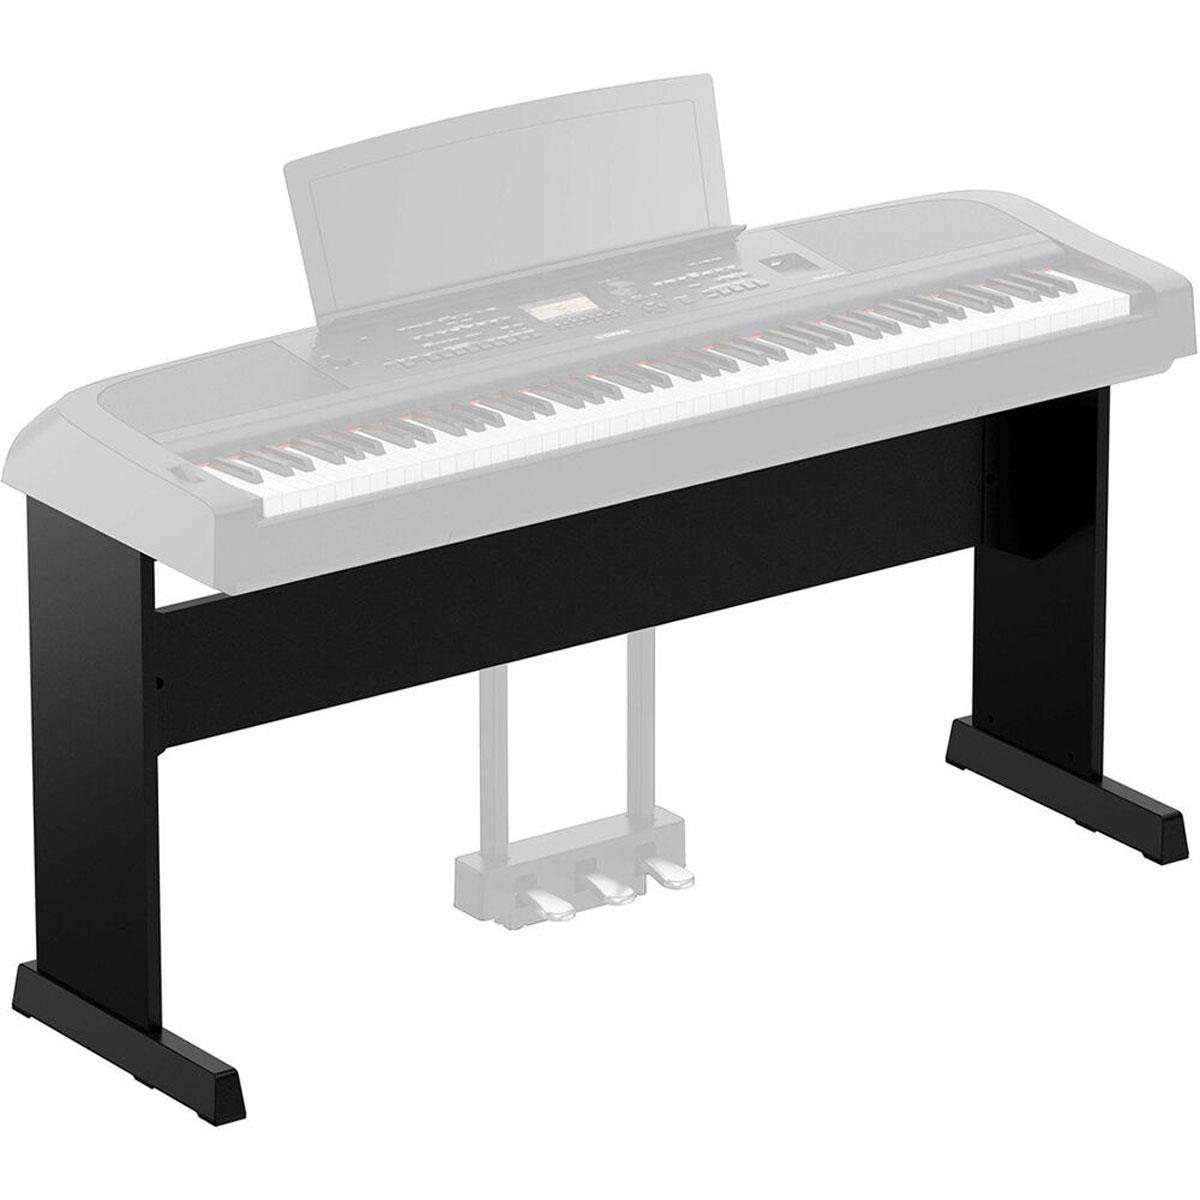 Image of Yamaha L-300 Wooden Stand for DGX670B and PS500B Piano